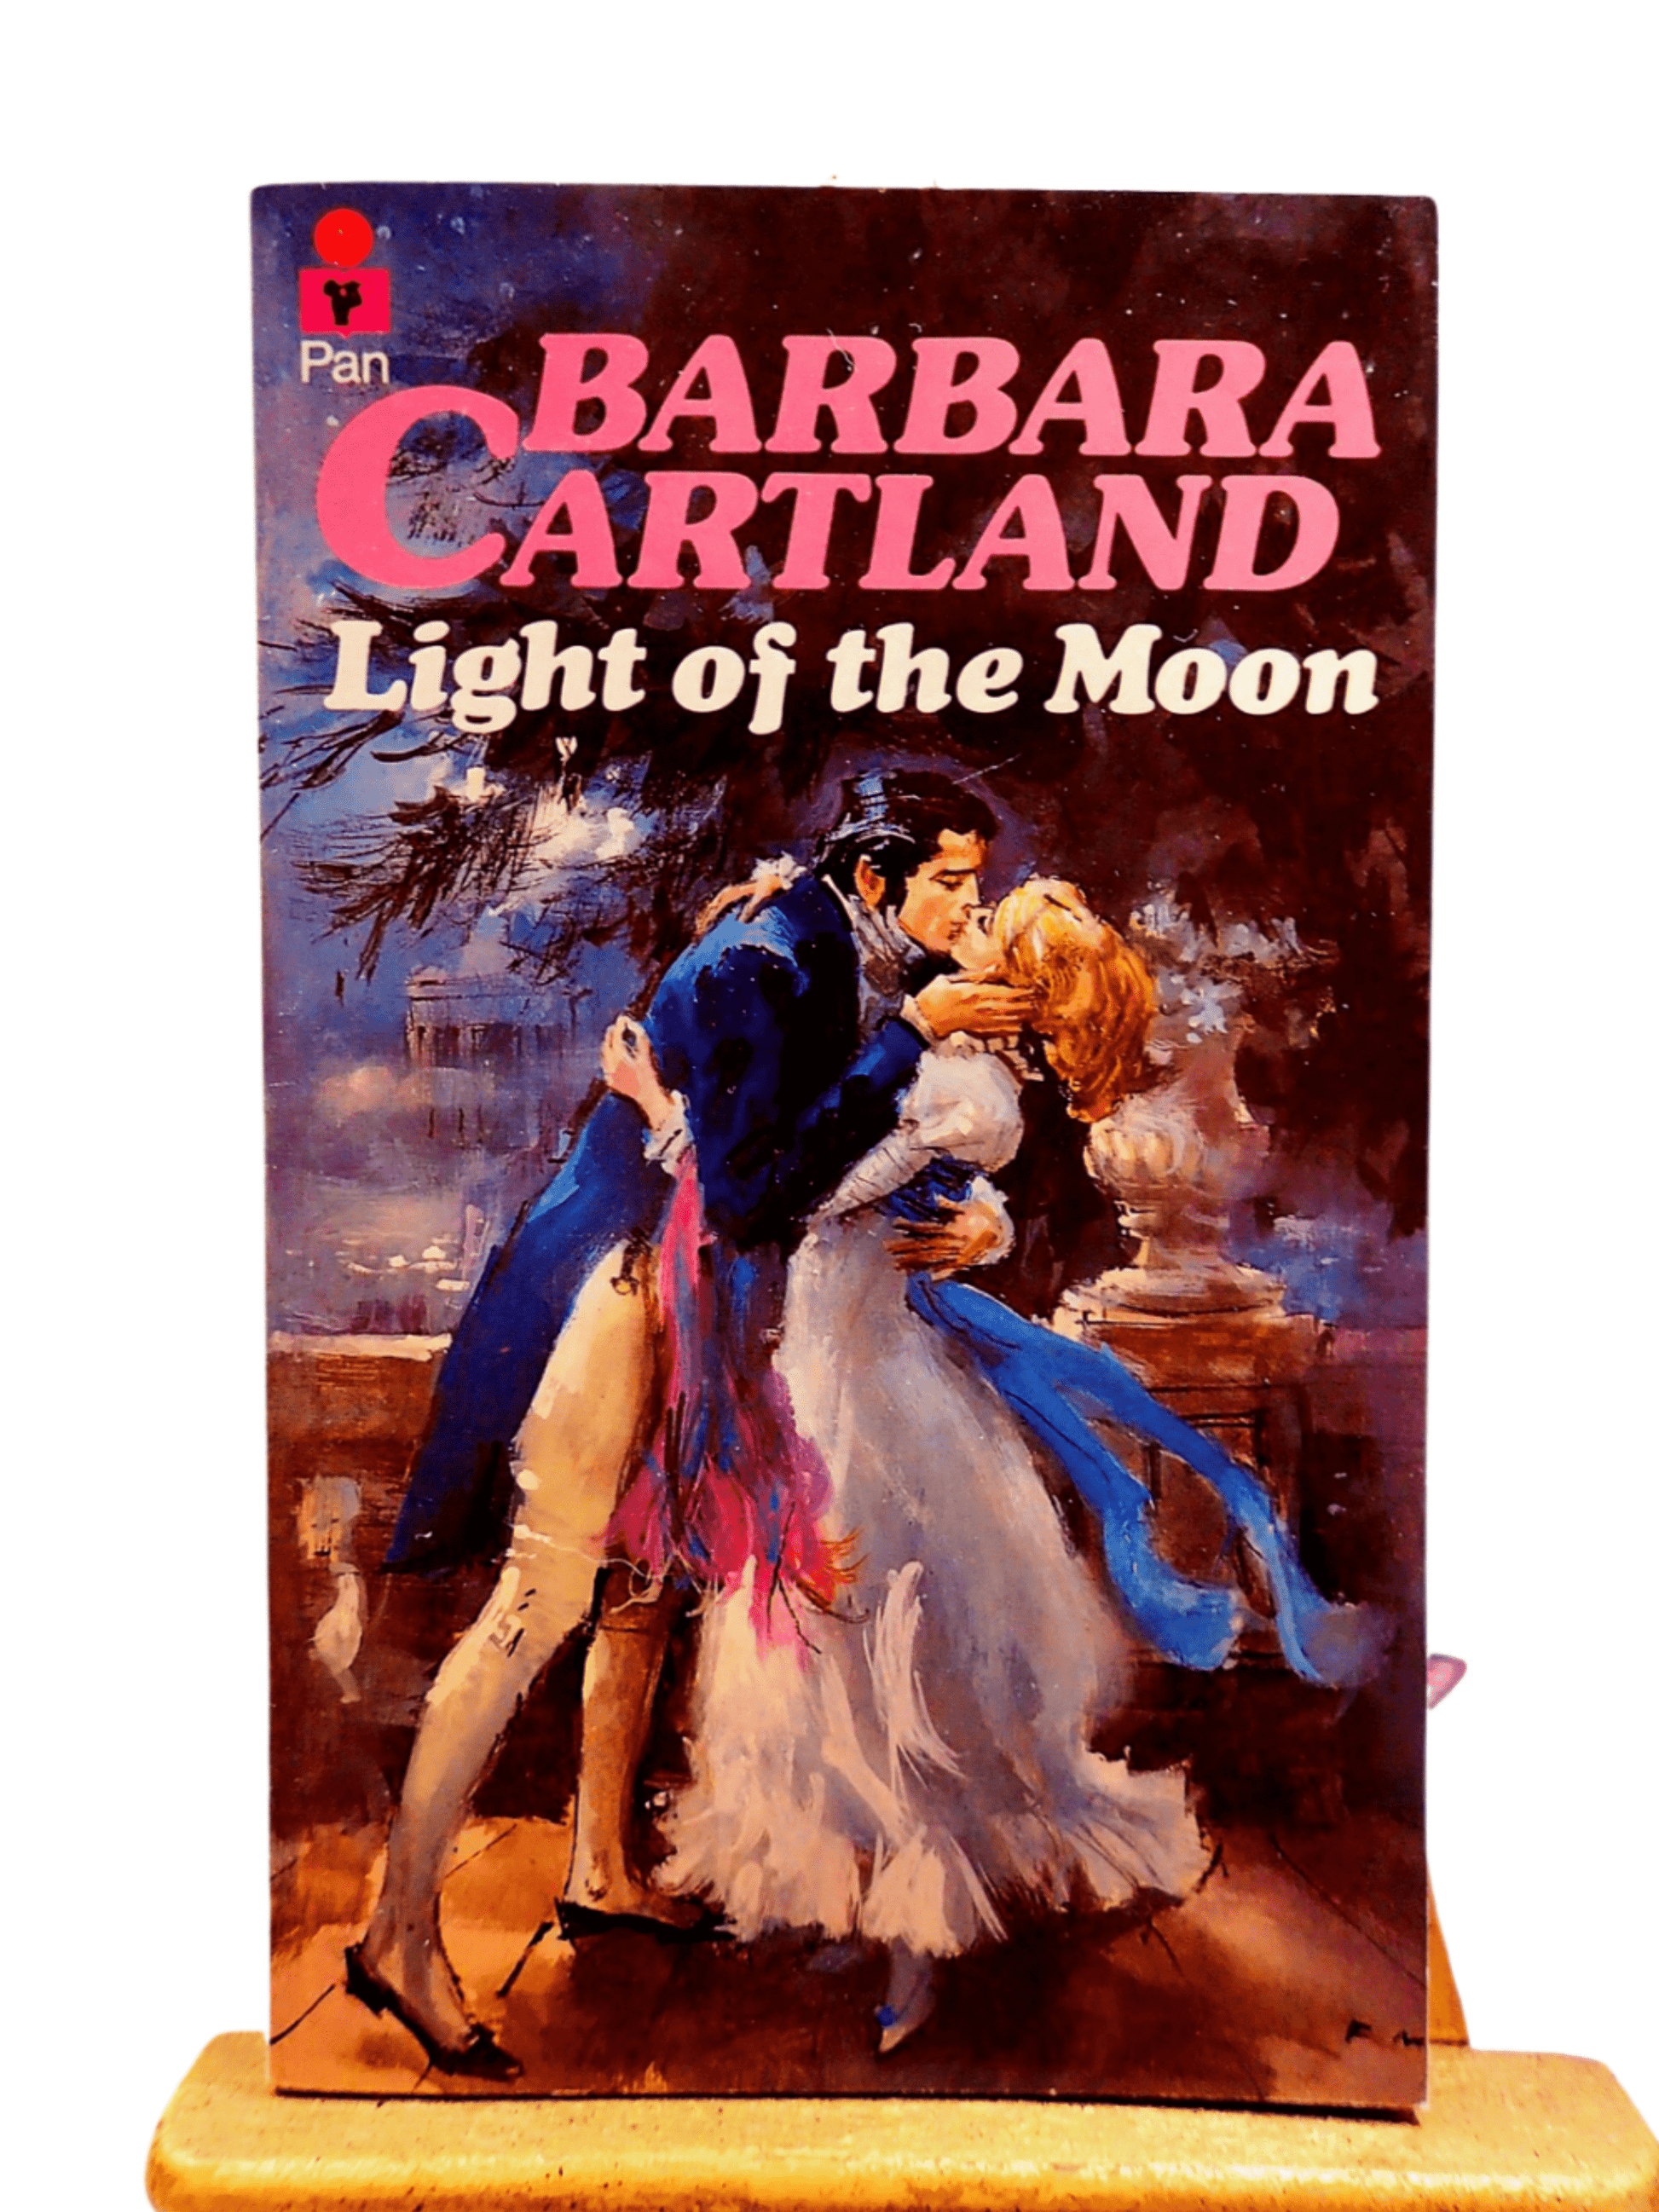 Front cover of Light of the Moon Barbara Cartland Pan Paperback First Edition showing a handsome man kissing passionately, a woman in a long white dress. 